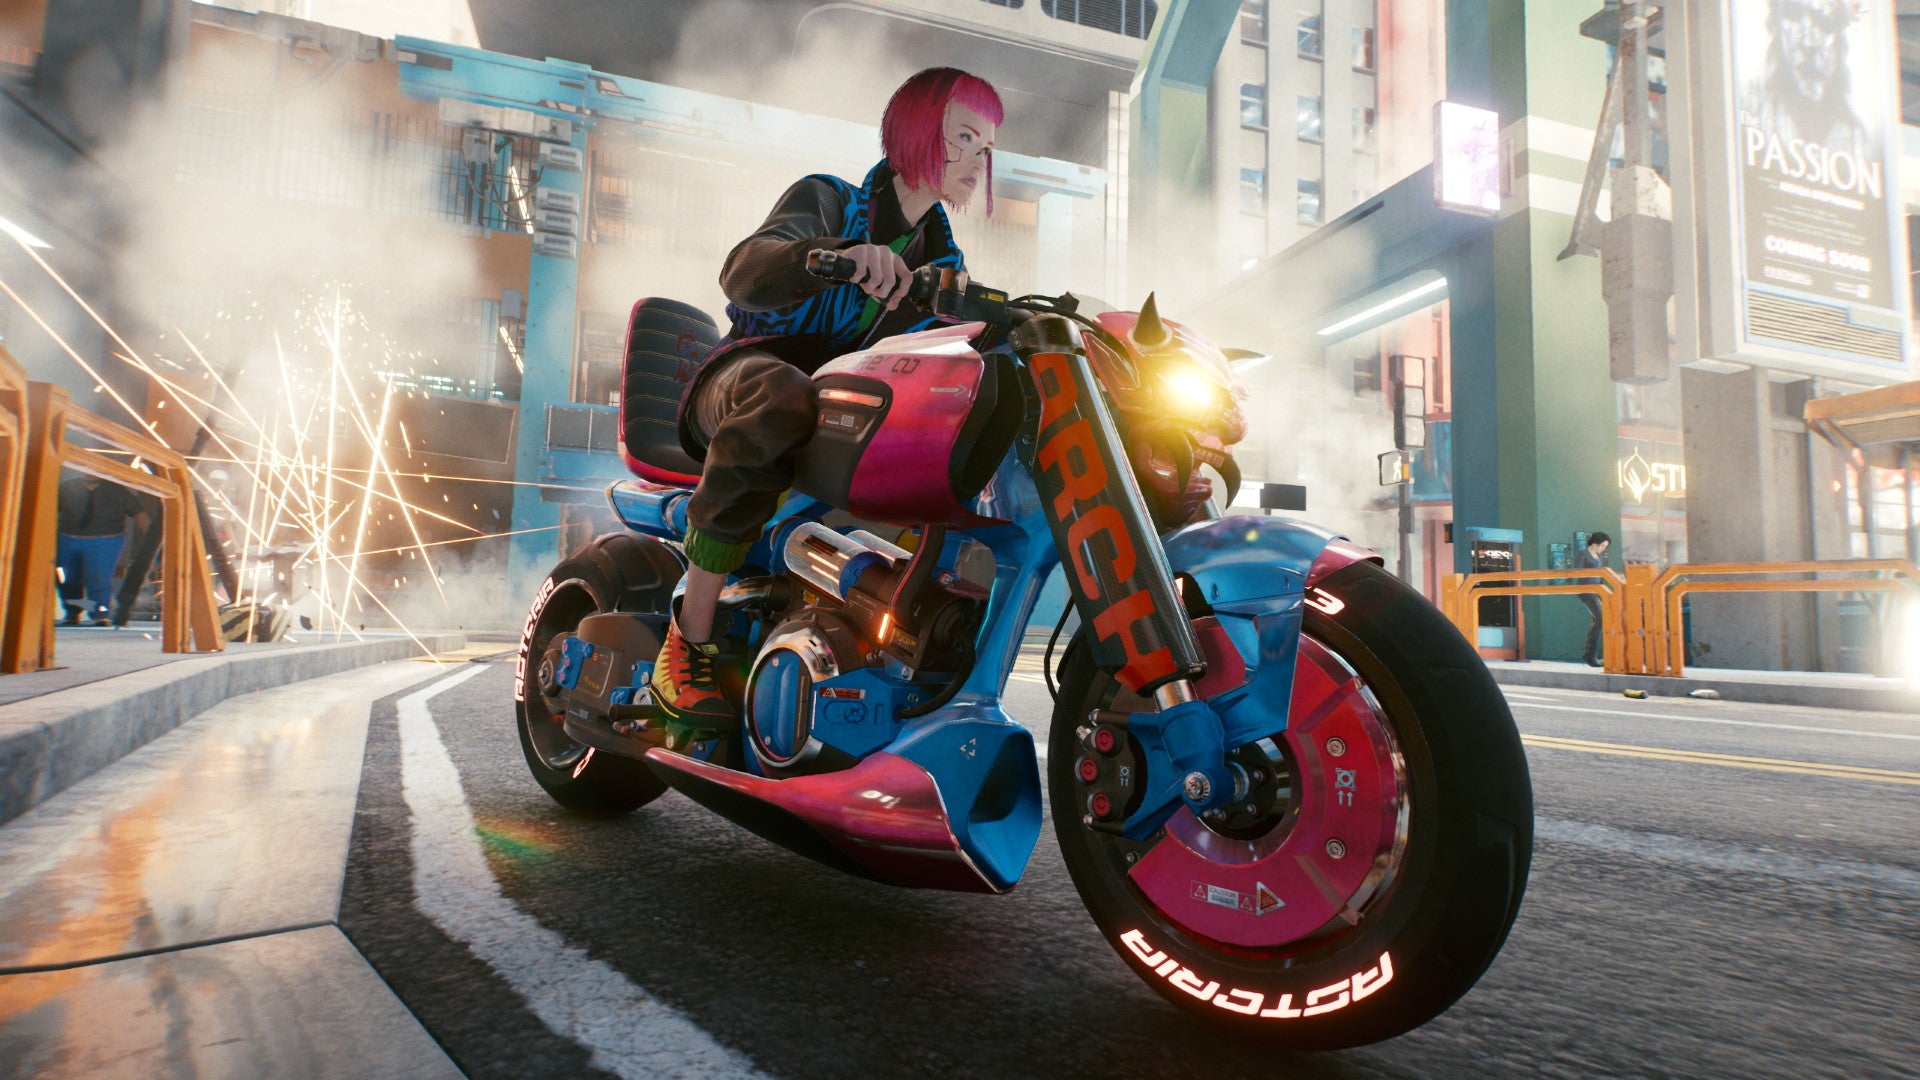 Cyberpunk 2077 - V riding on a bright pink and blue motorcycle.